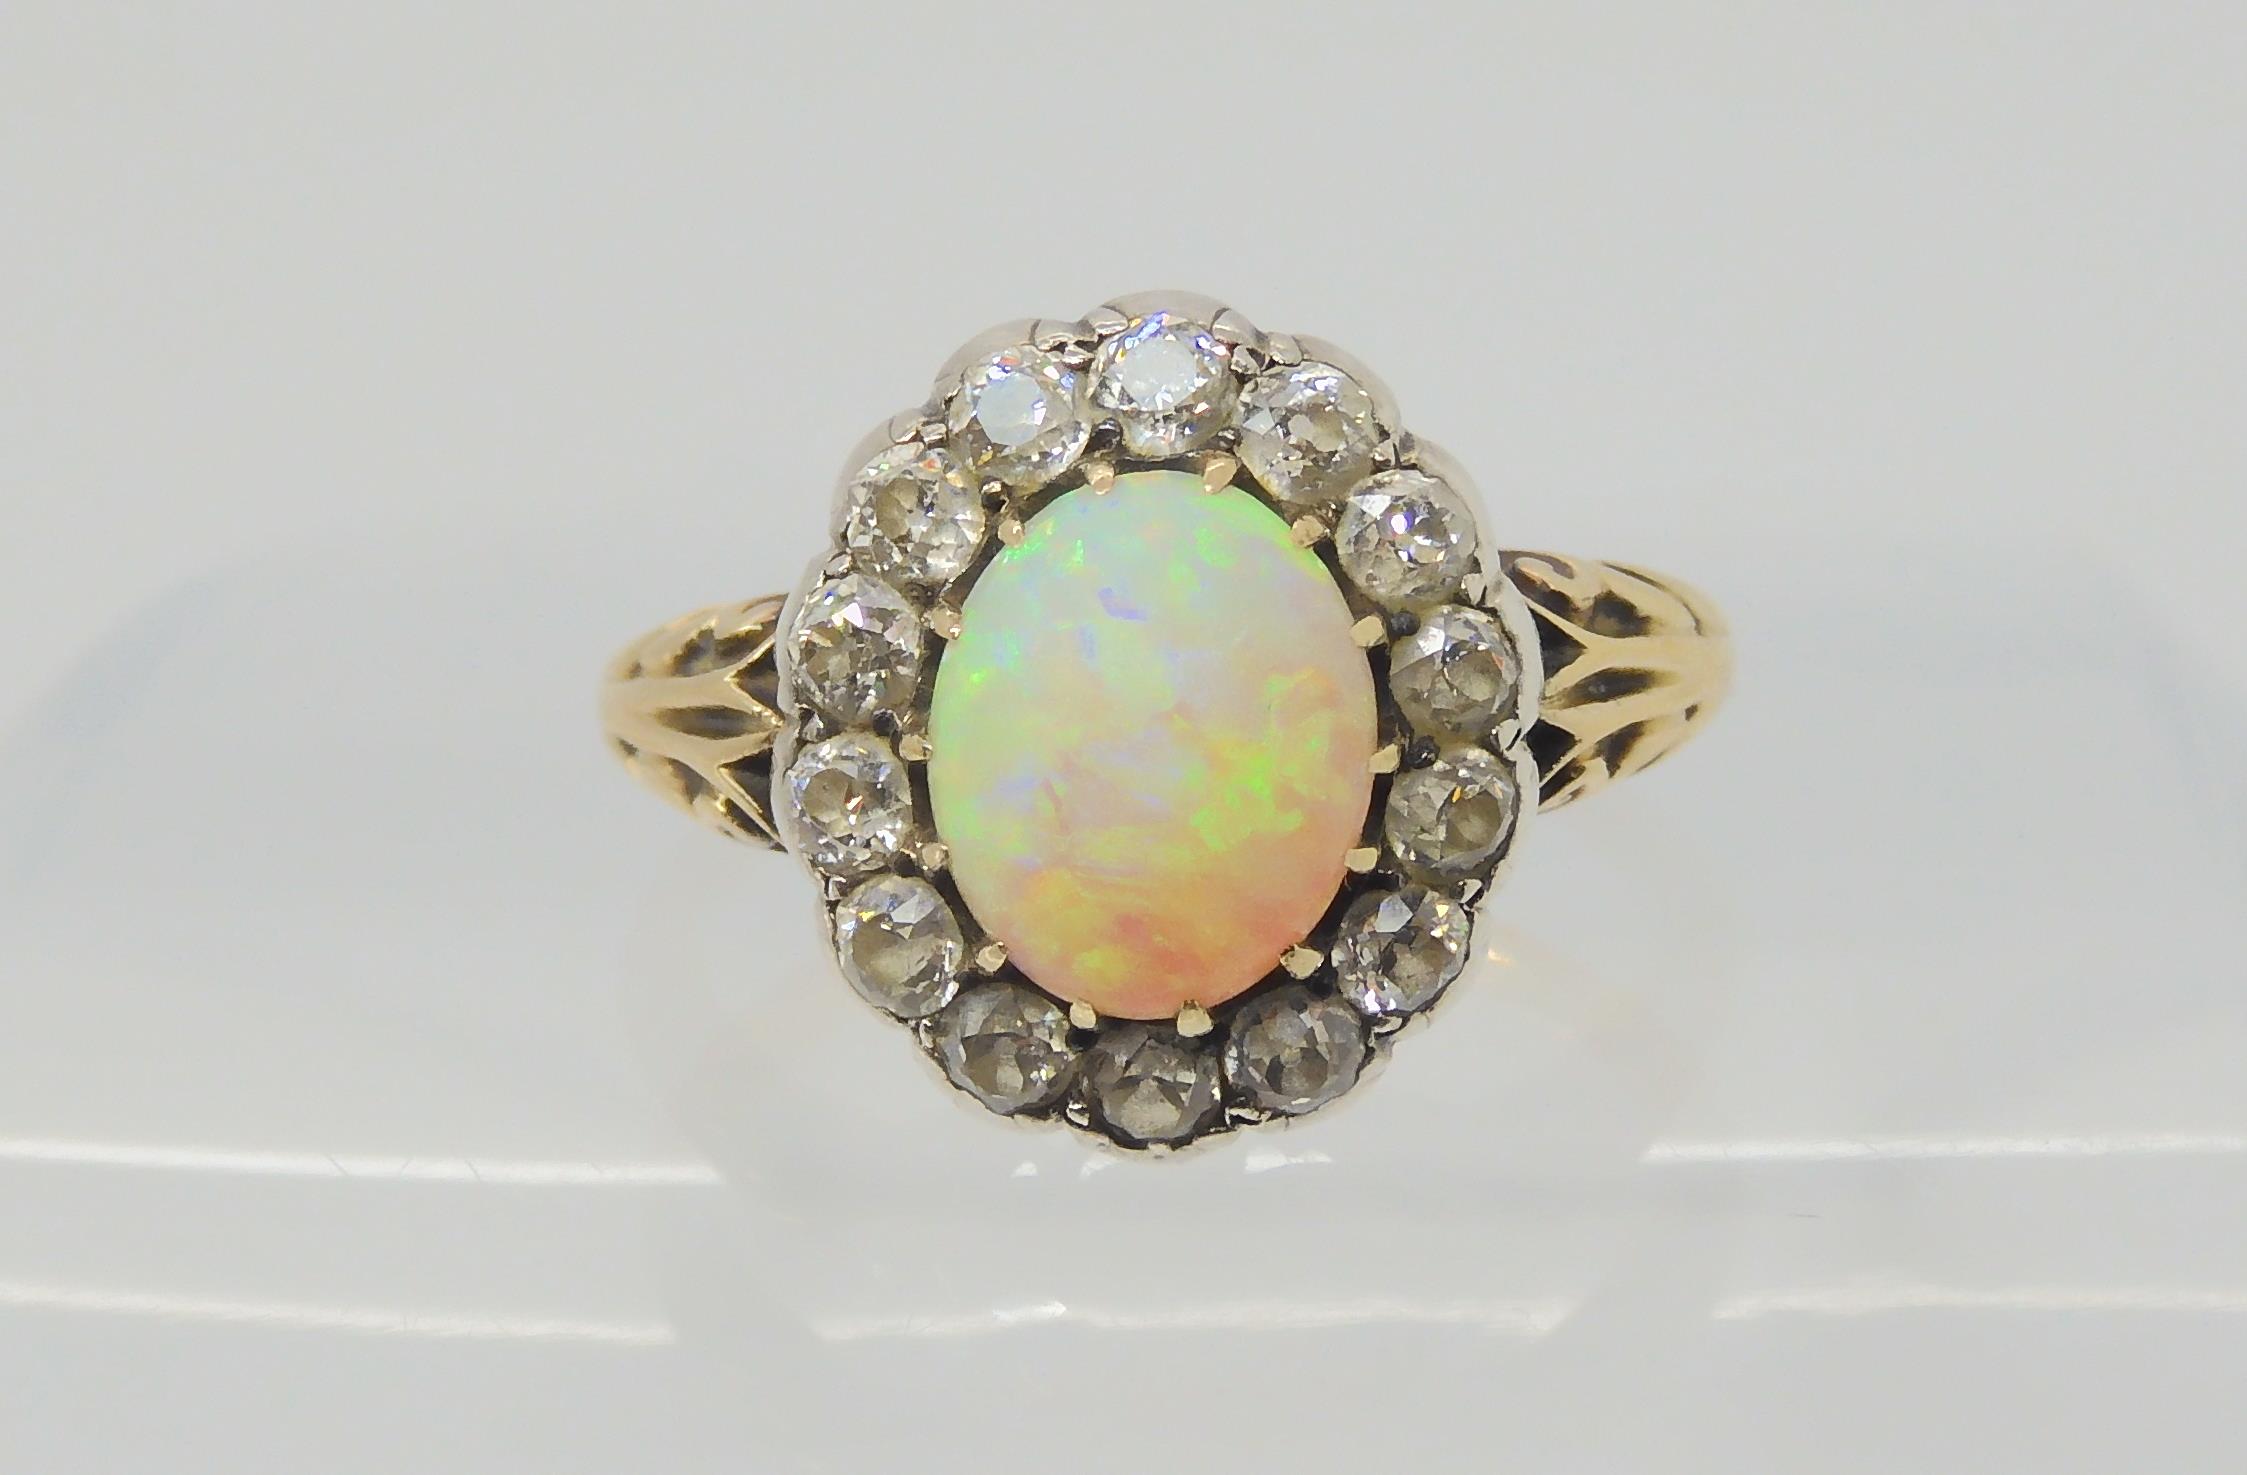 AN OPAL AND DIAMOND RING set with a high domed opal of approx 8.8mm x 7.1mm x 4.1mm, surrounded with